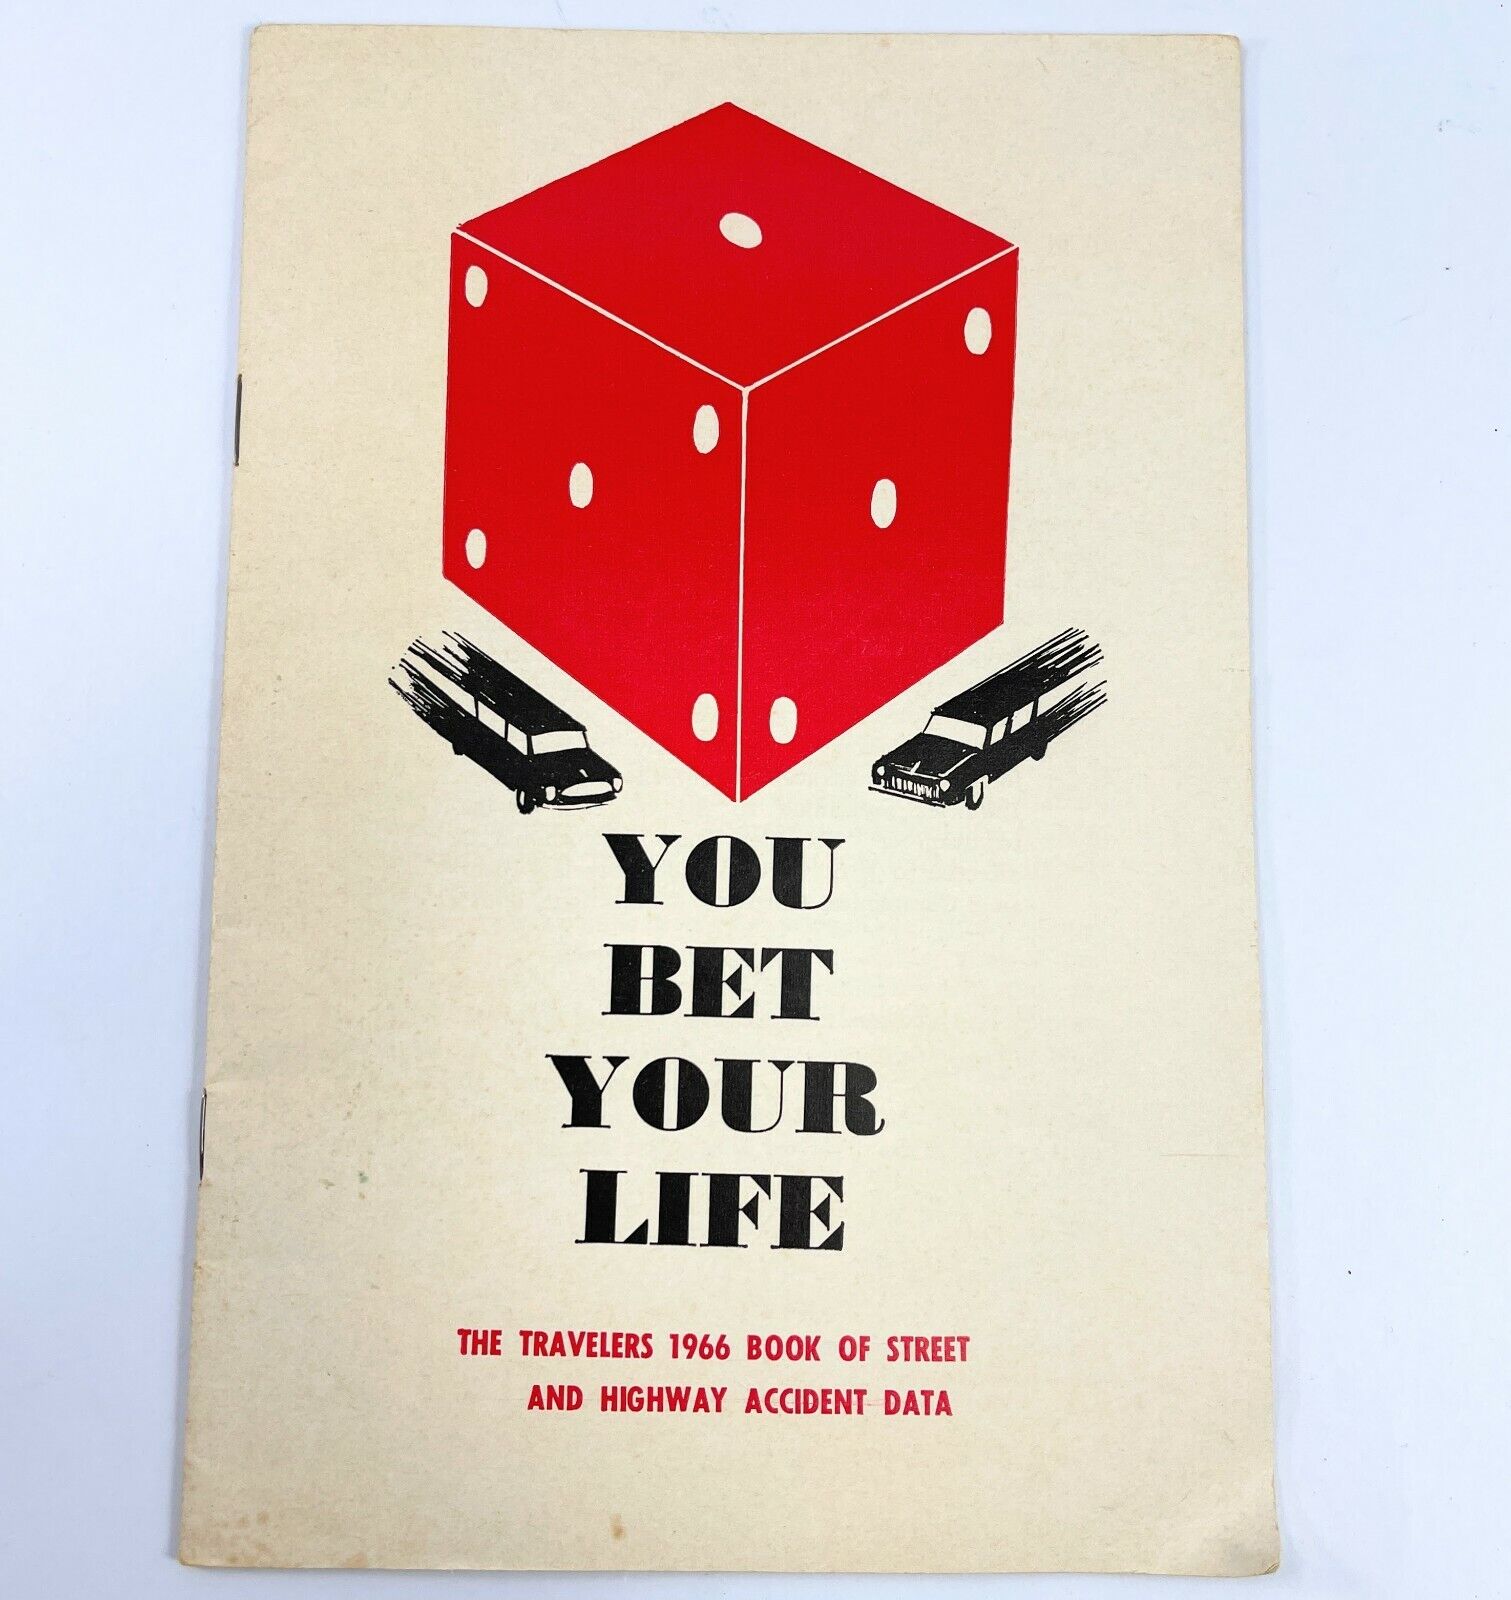 1966 Travelers Insurance Booklet of Street & Highway Accident Data Bet Your Life